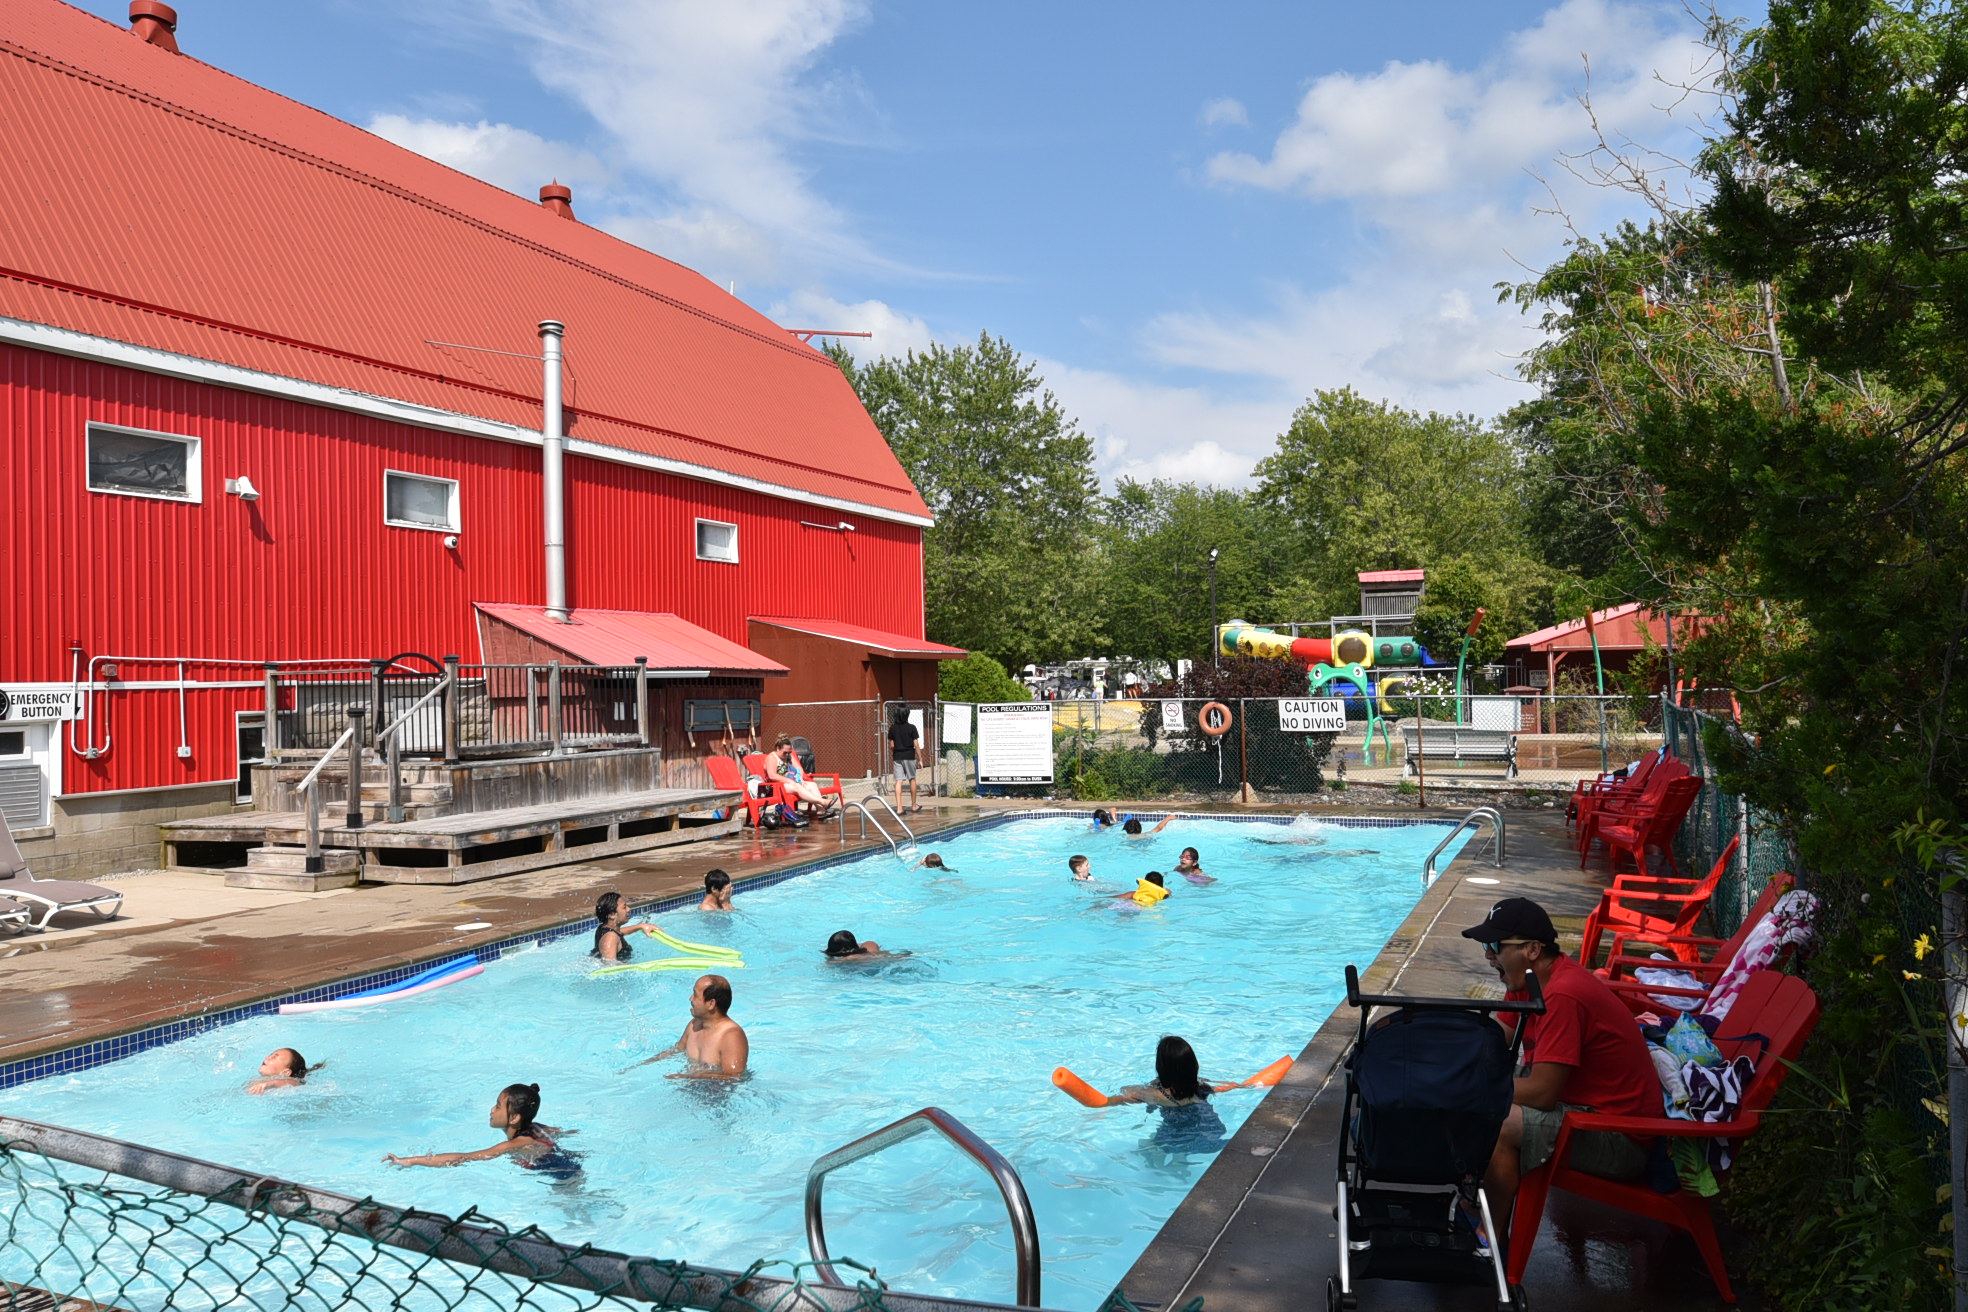 Families splash around in a rectangular swimming pool near a red barn-like structure.